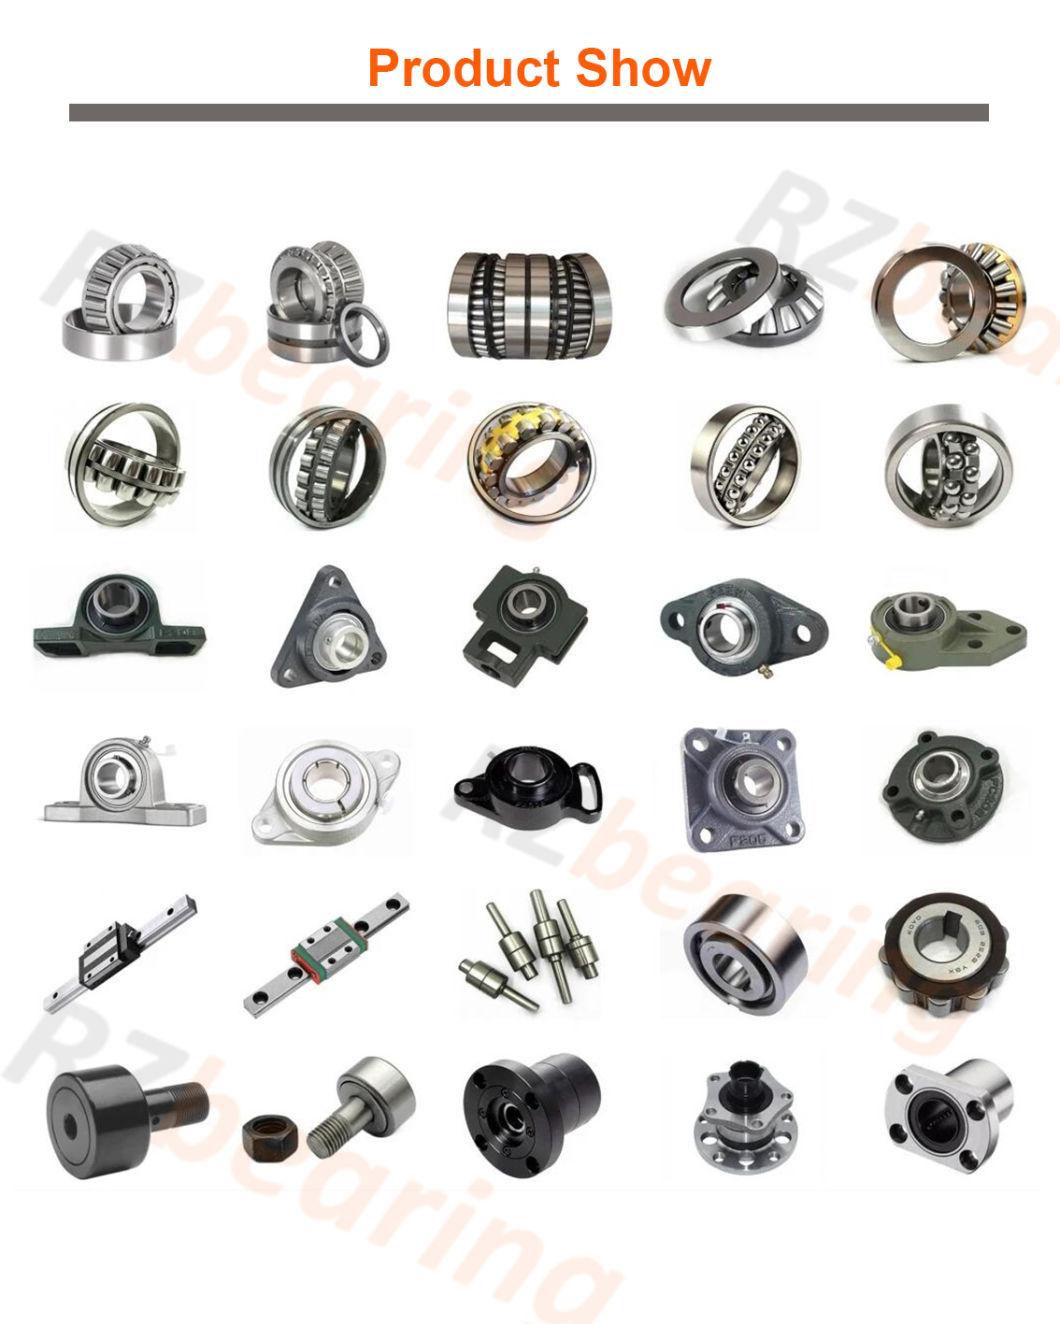 Bearings Low Noise Construction Machinery Parts Bearing 6900 Deep Groove Ball Bearing for Sale